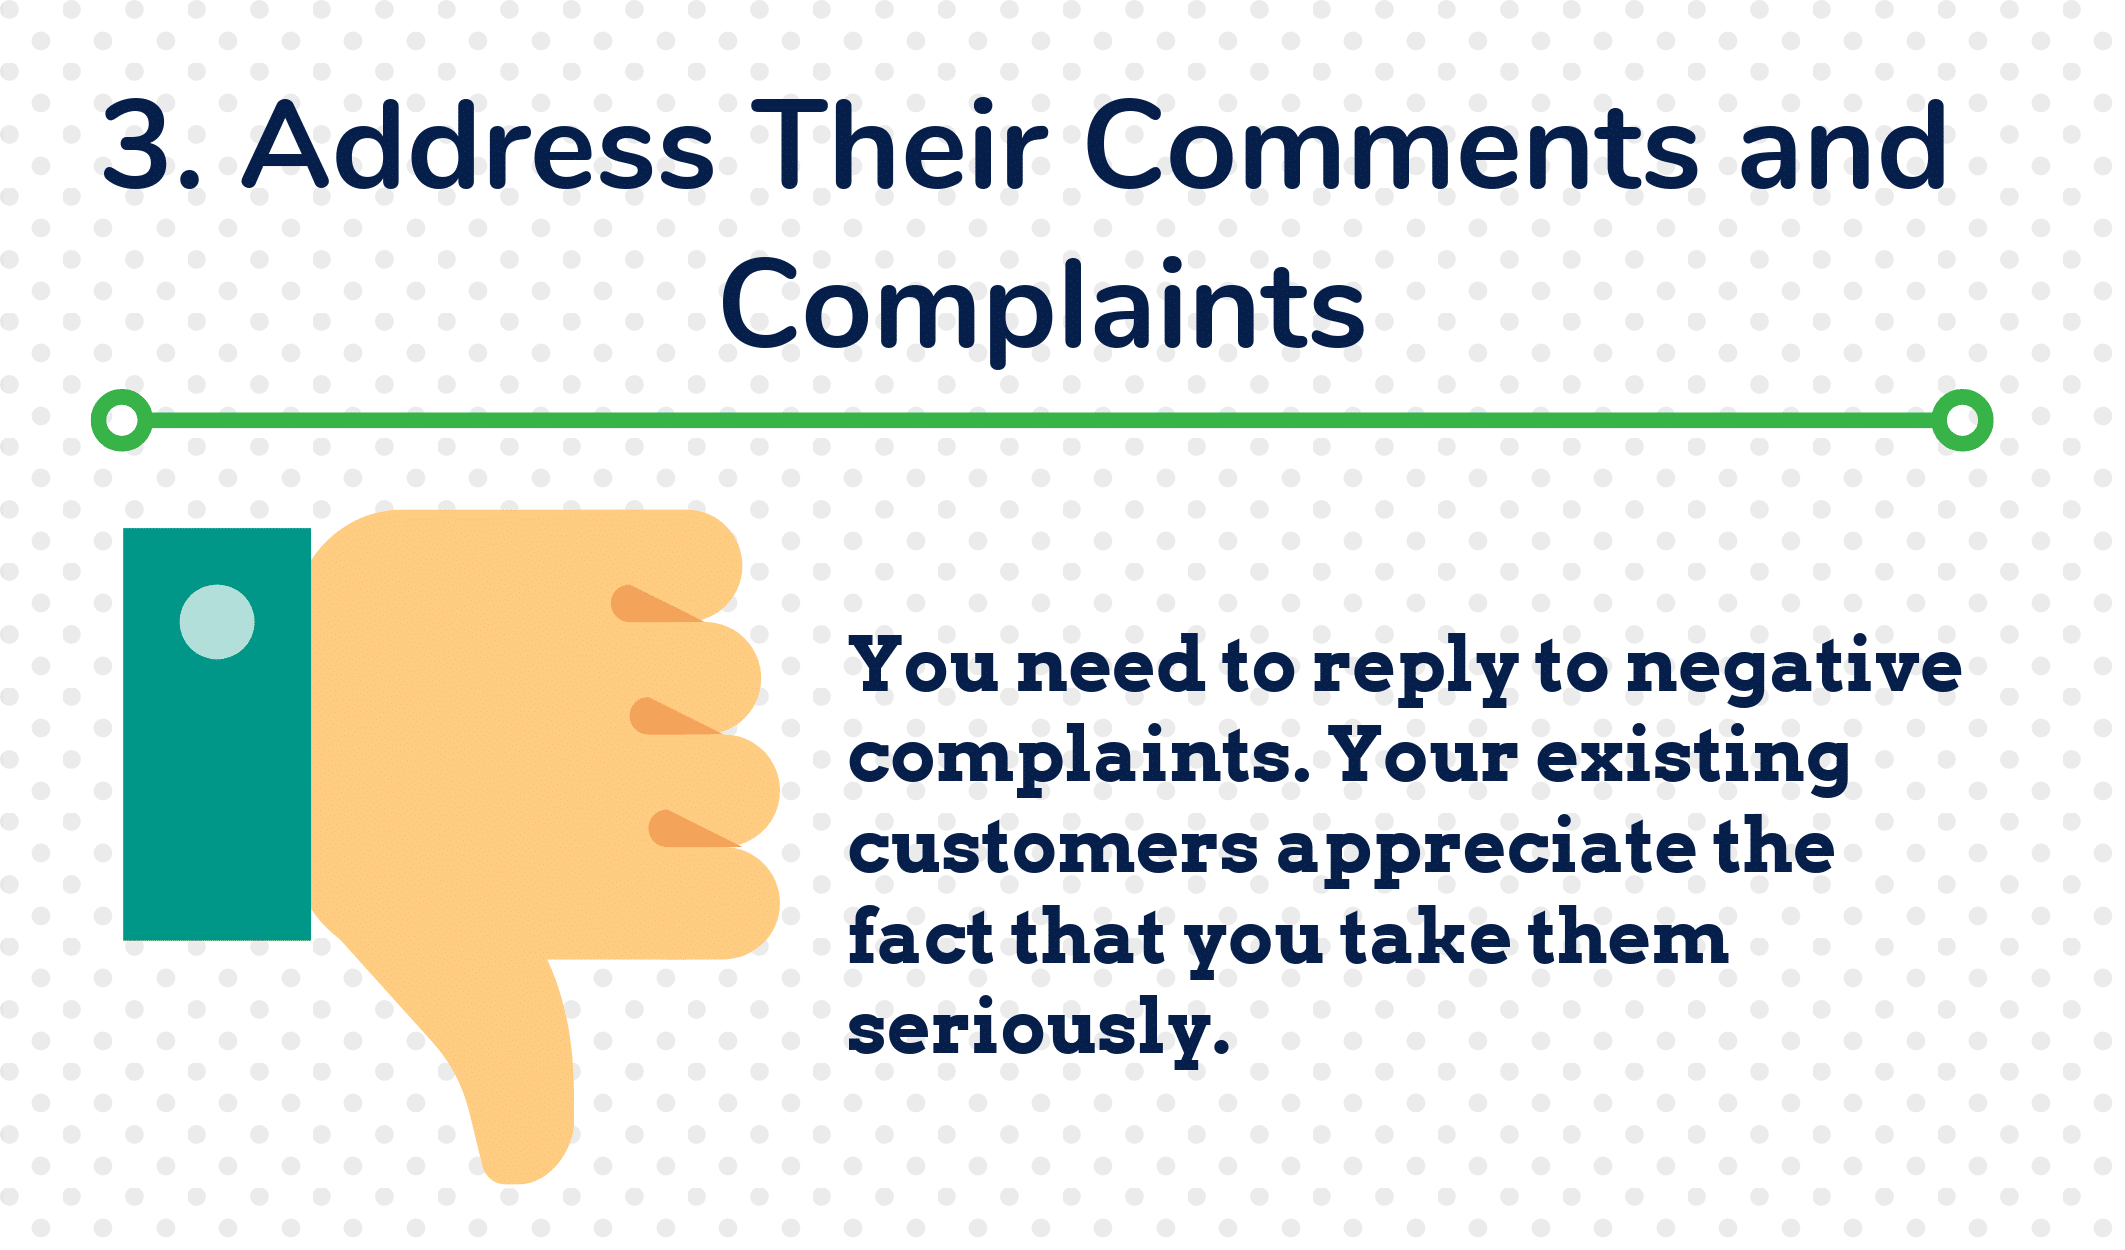 3. Address Their Comments and Complaints